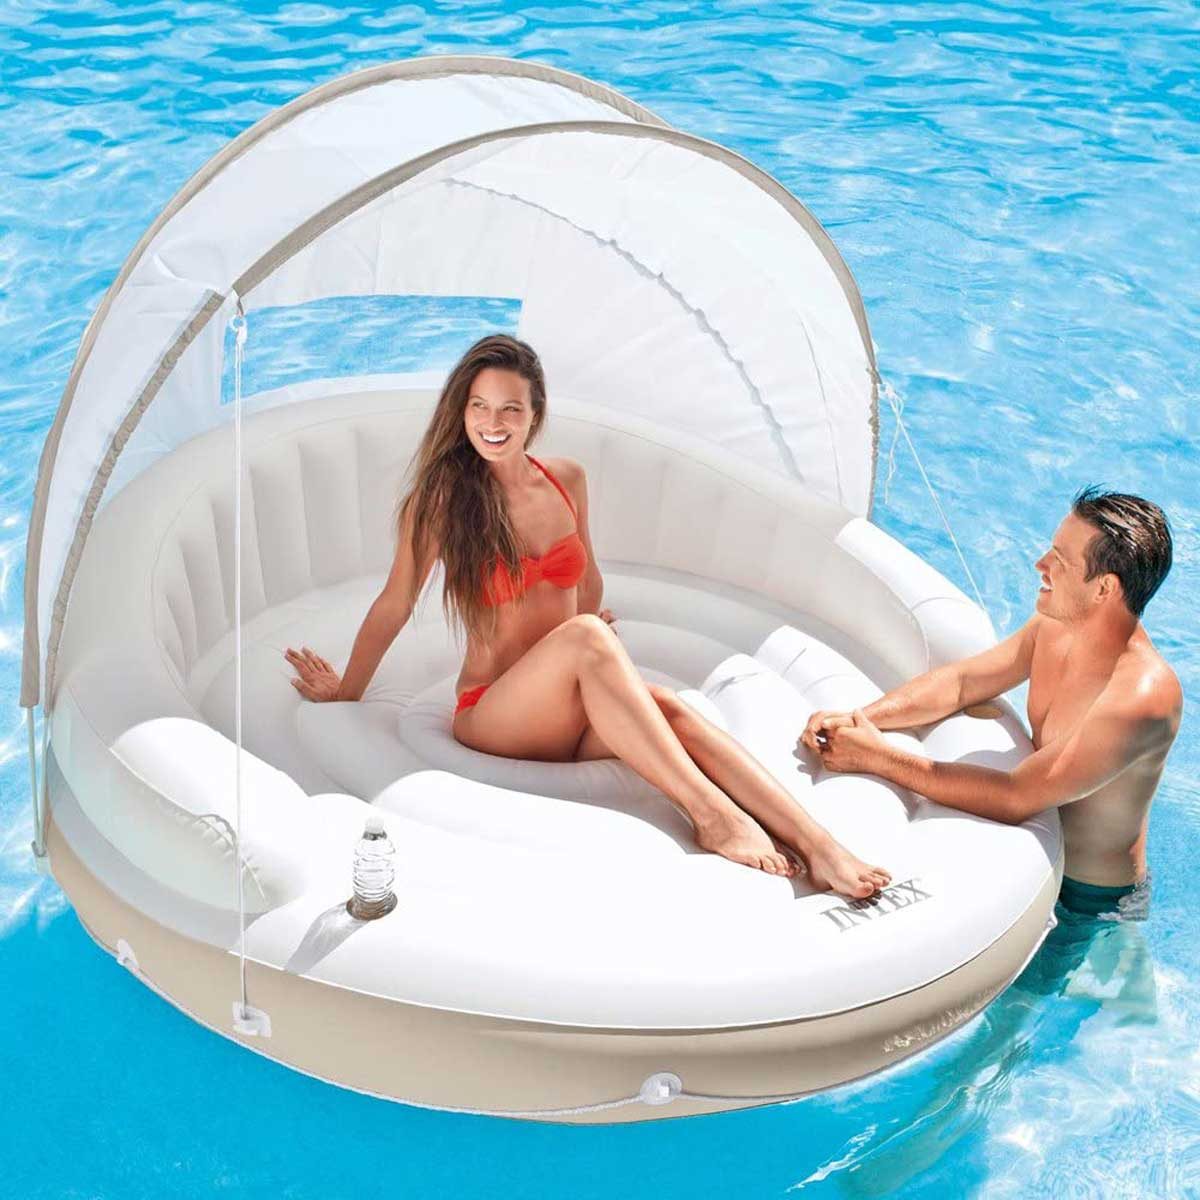 What Are The Best Mats For Pool Cabanas: Ideas & Features